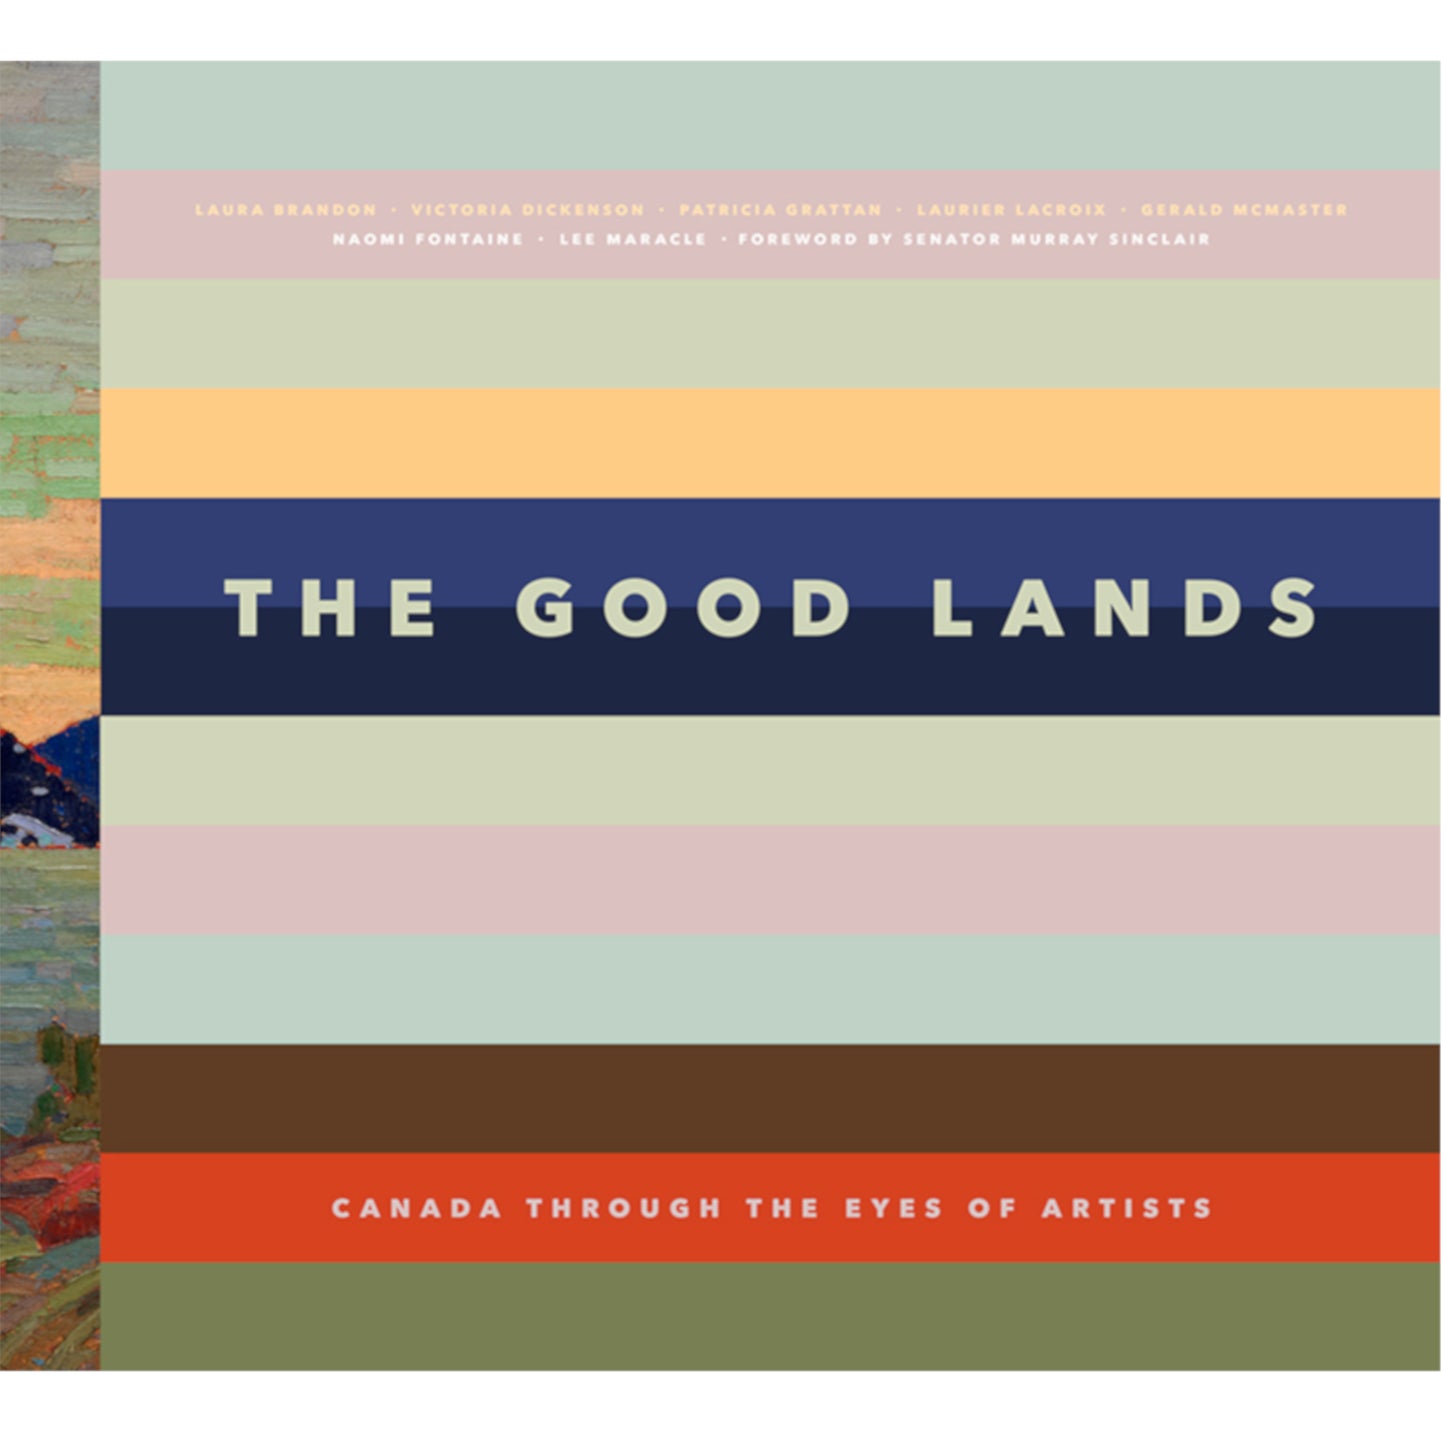 Made in Canada Art book titled The Good Lands with indigenous and non indigenous contemporary and historical Canadian art.